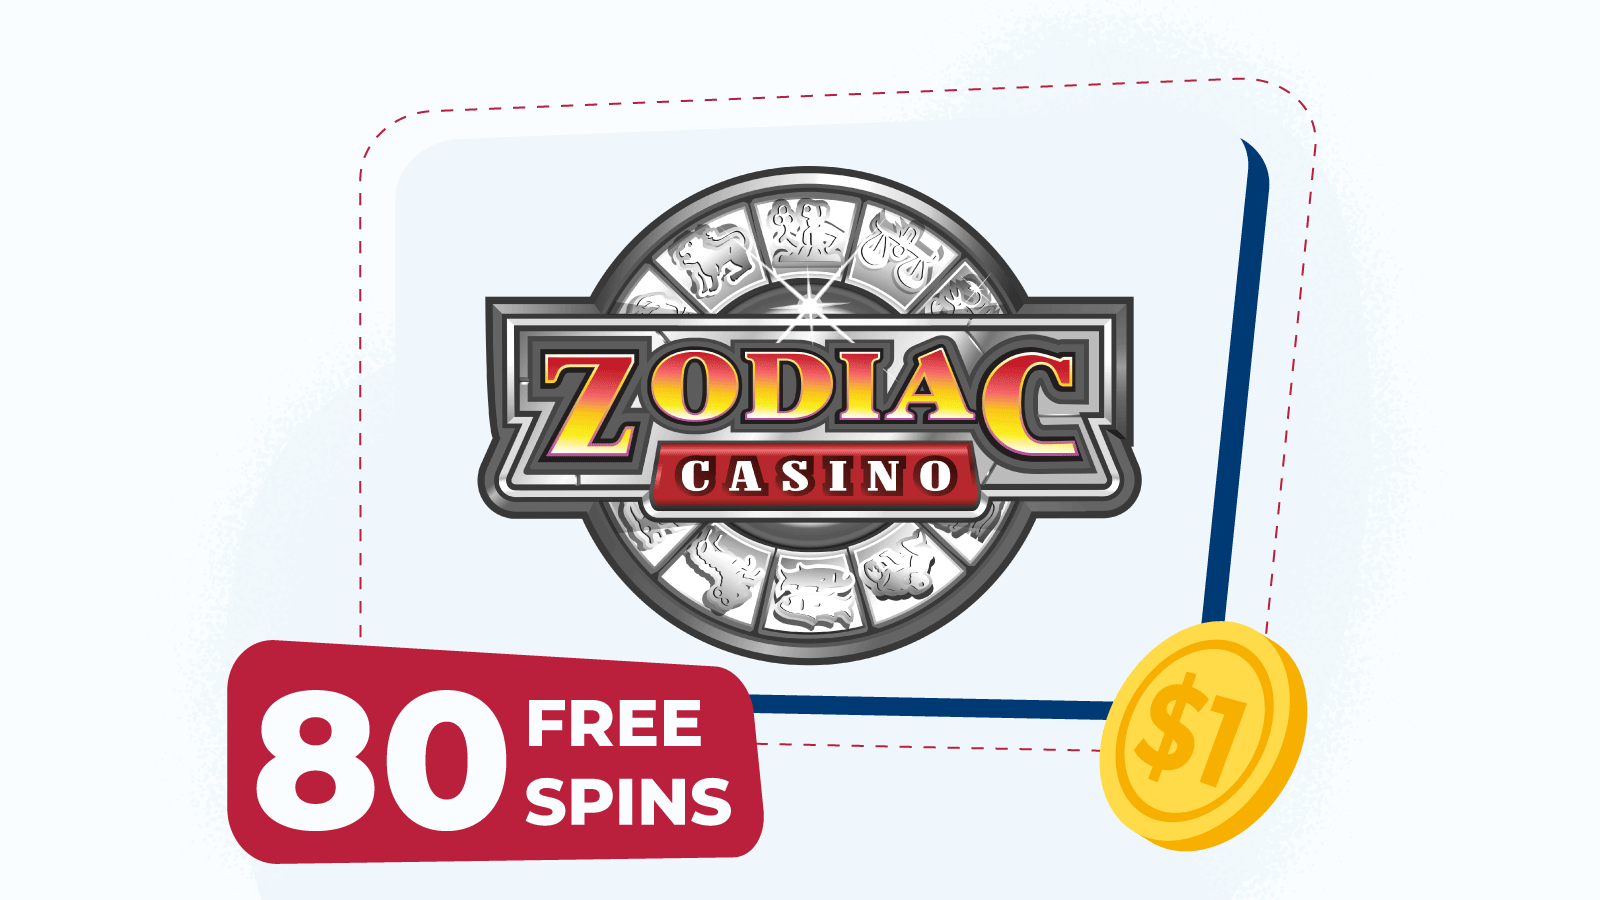 80 free spins for R$1 at Zodiac Casino Rewards